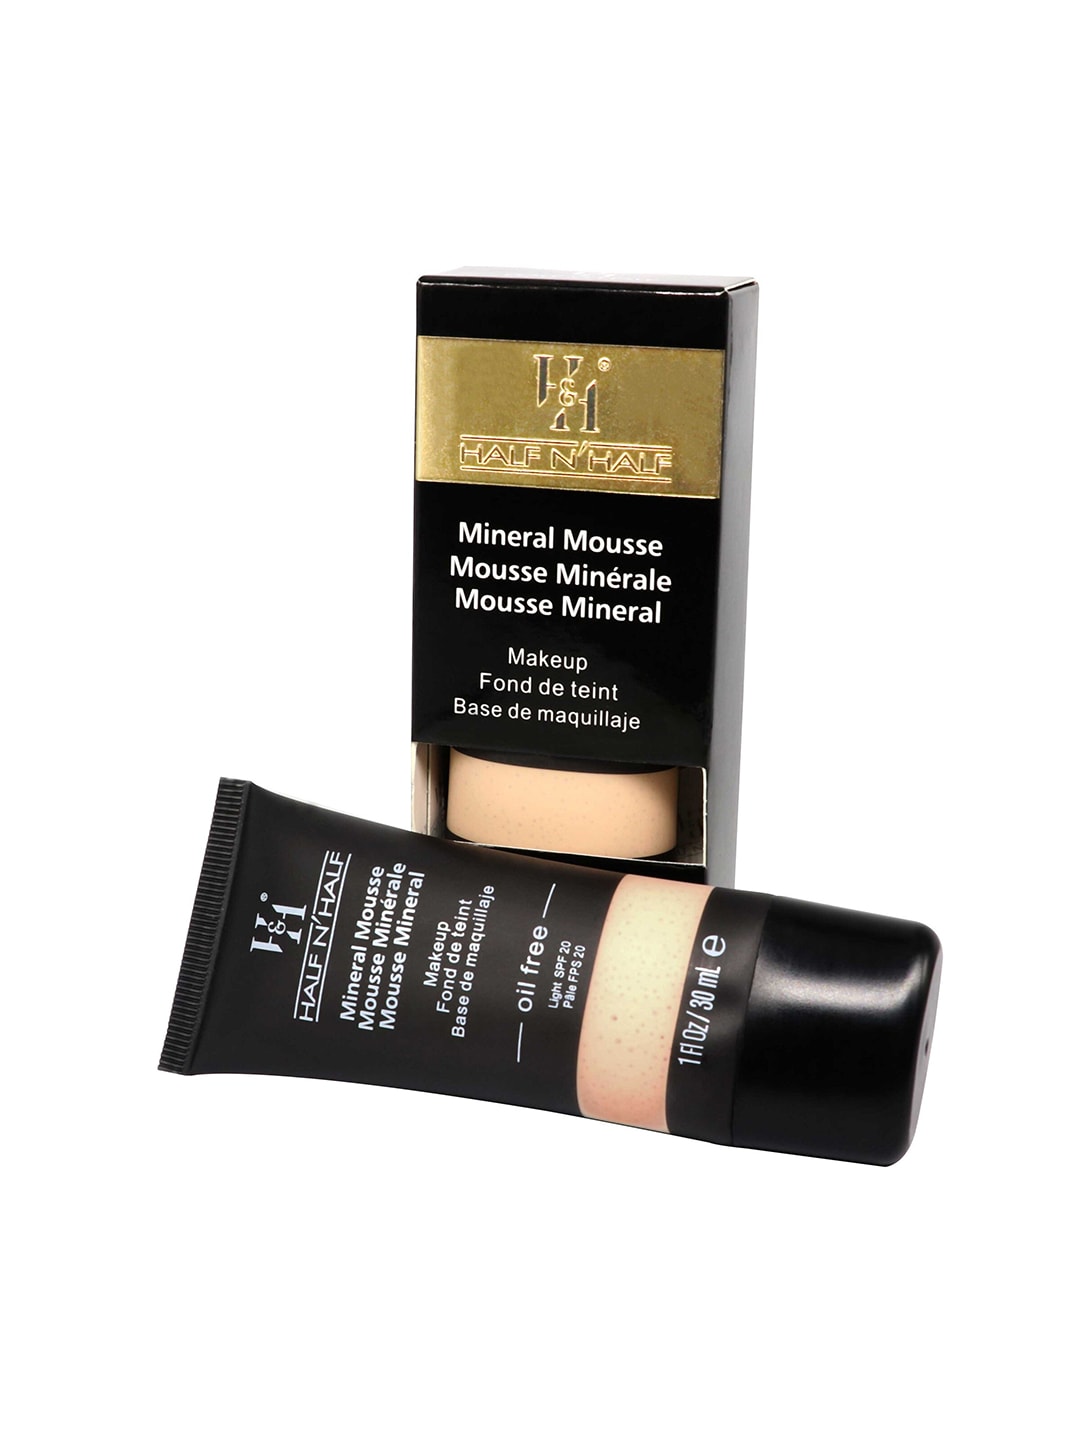 Half N Half Cream-Coloured Mineral Mousse Oil Free Foundation Light SPF 20 - 30 ml Price in India